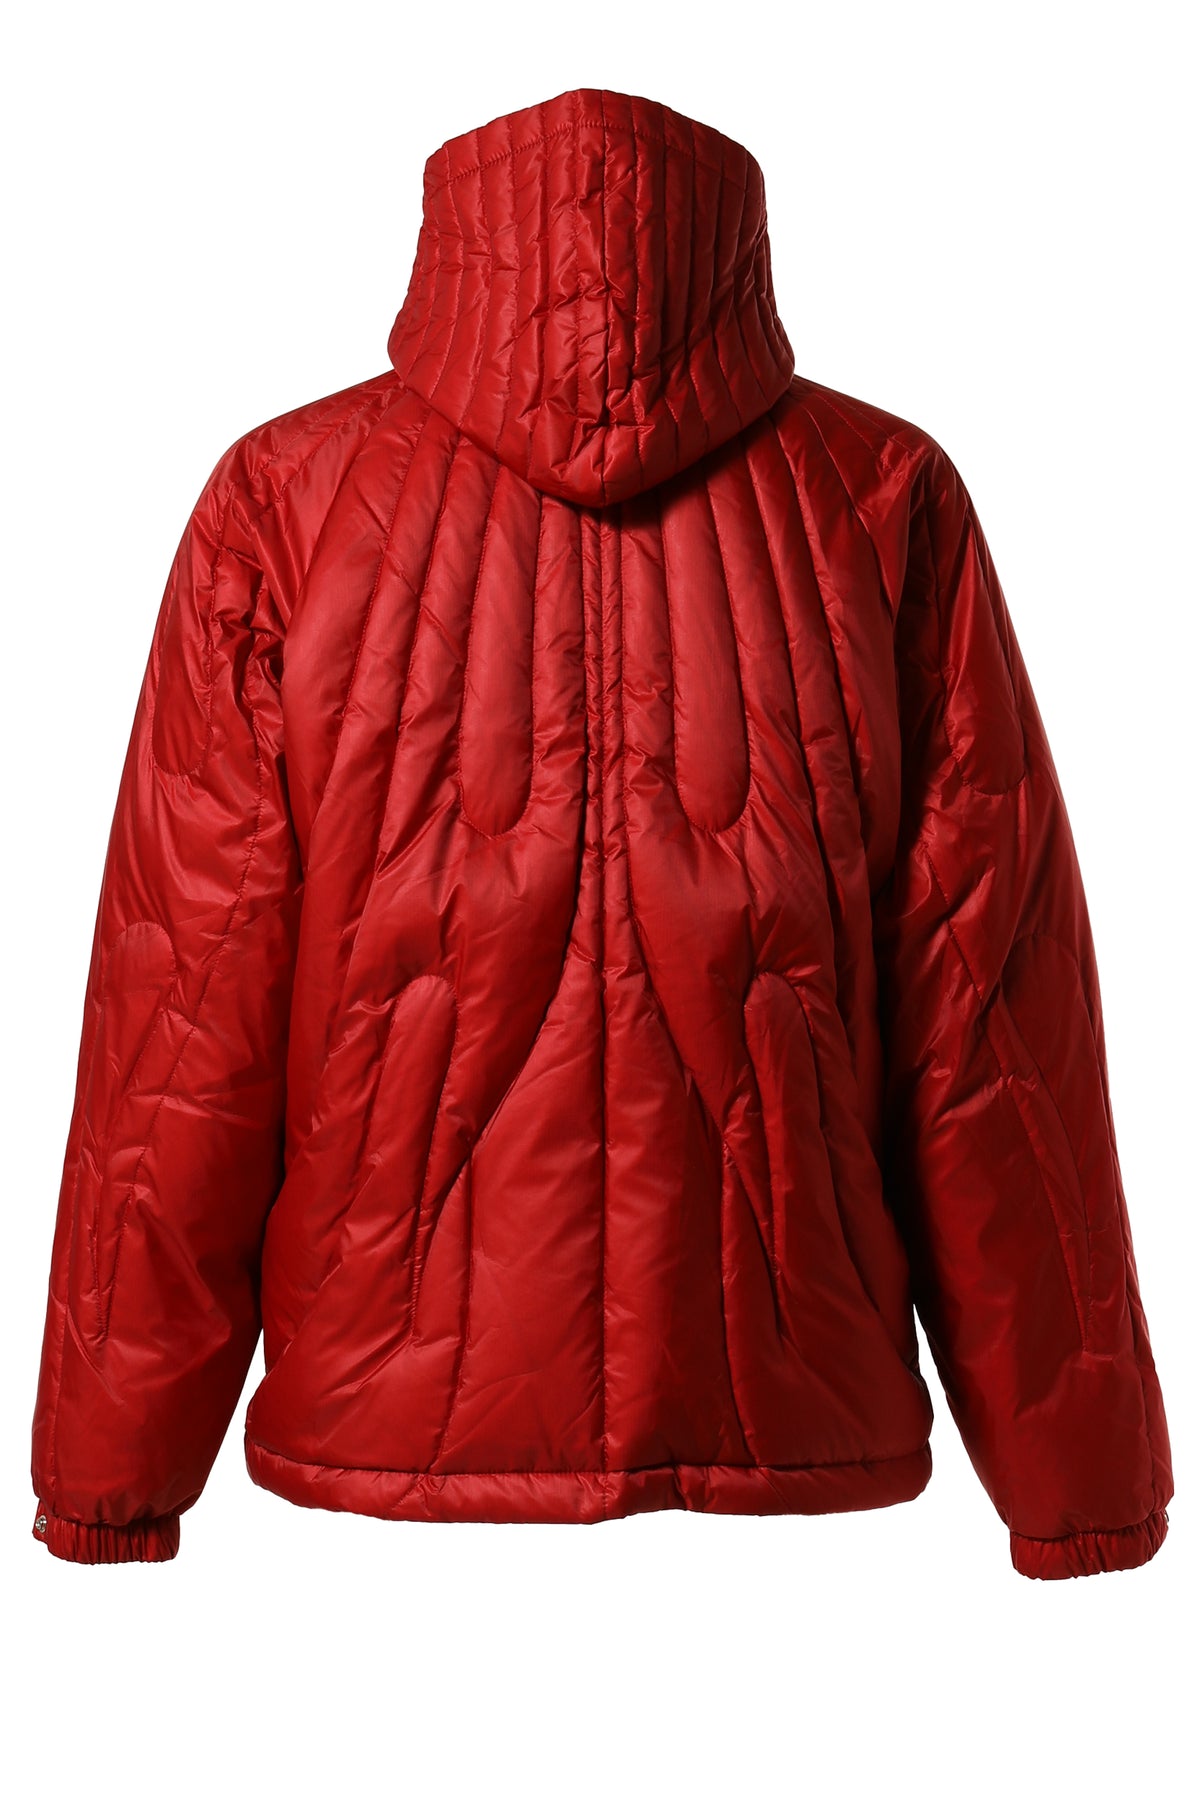 CAVE GOOSE DOWN JACKET / RED